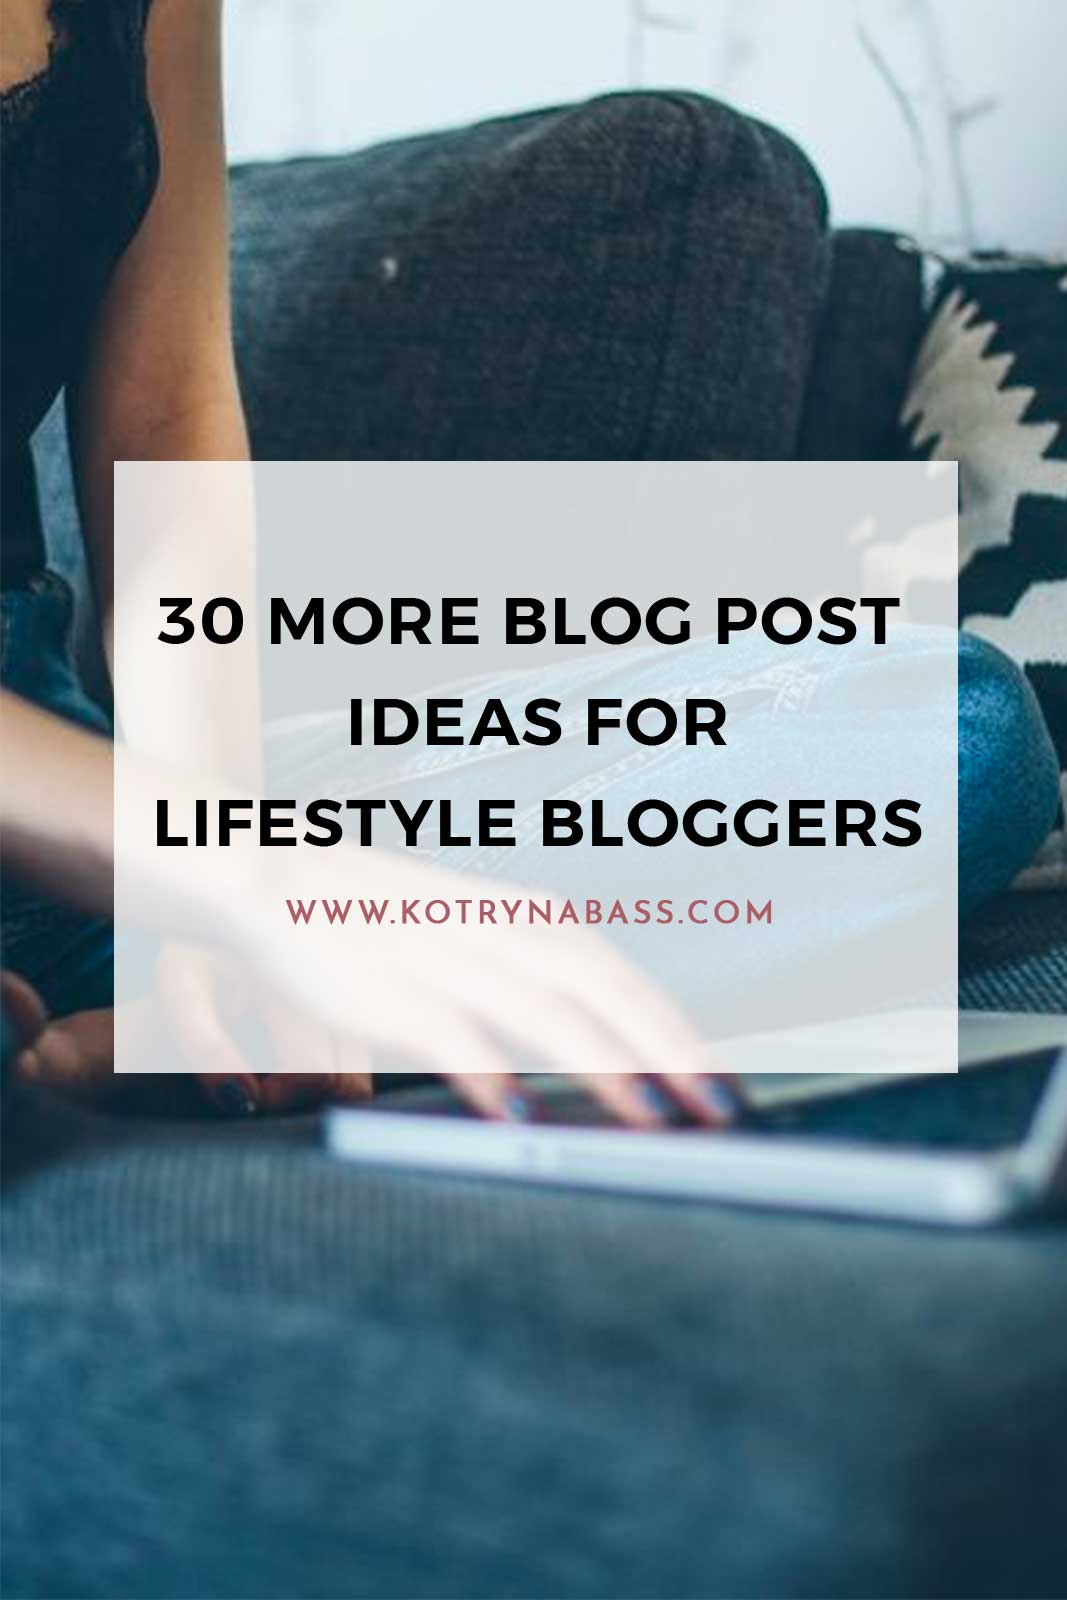 30 More Blog Post Ideas For Lifestyle Bloggers ...